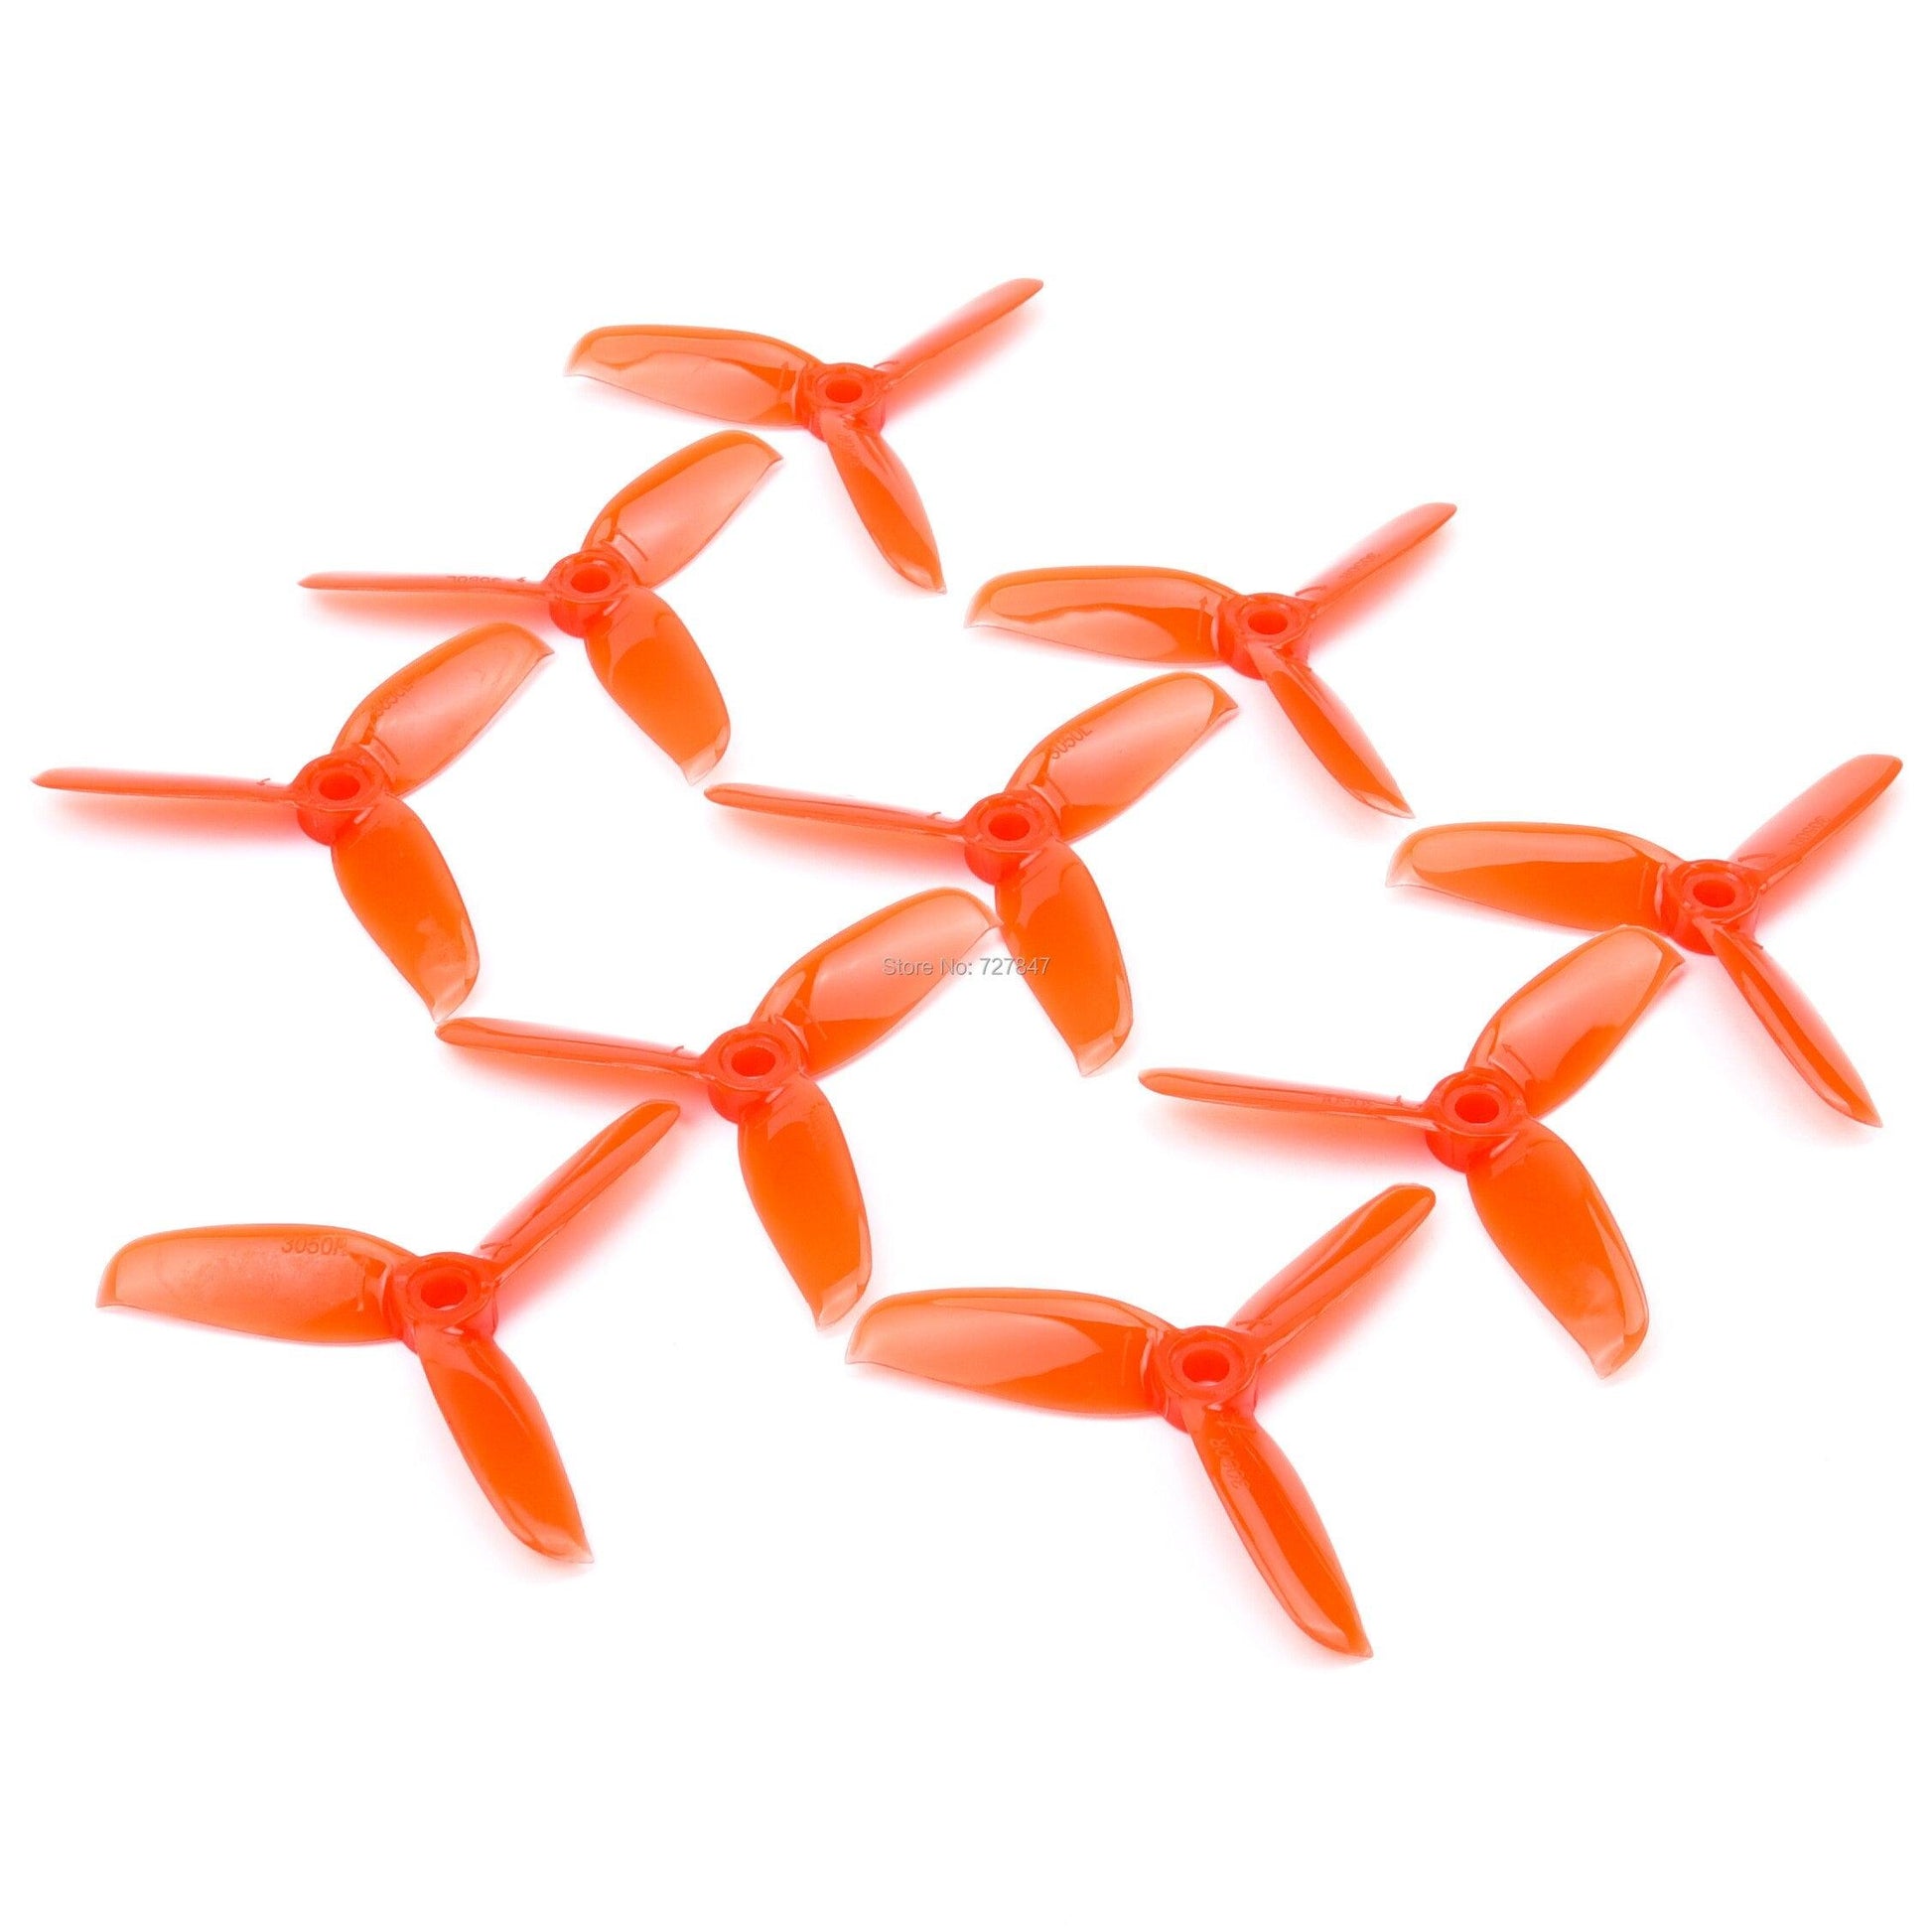 3 Inch PC 3-Blade FPV Propeller - 3050 3x5 CW CCW Paddles w/ 5mm Mounting Hole for Micro Mini FPV RC Racing Drone - RCDrone